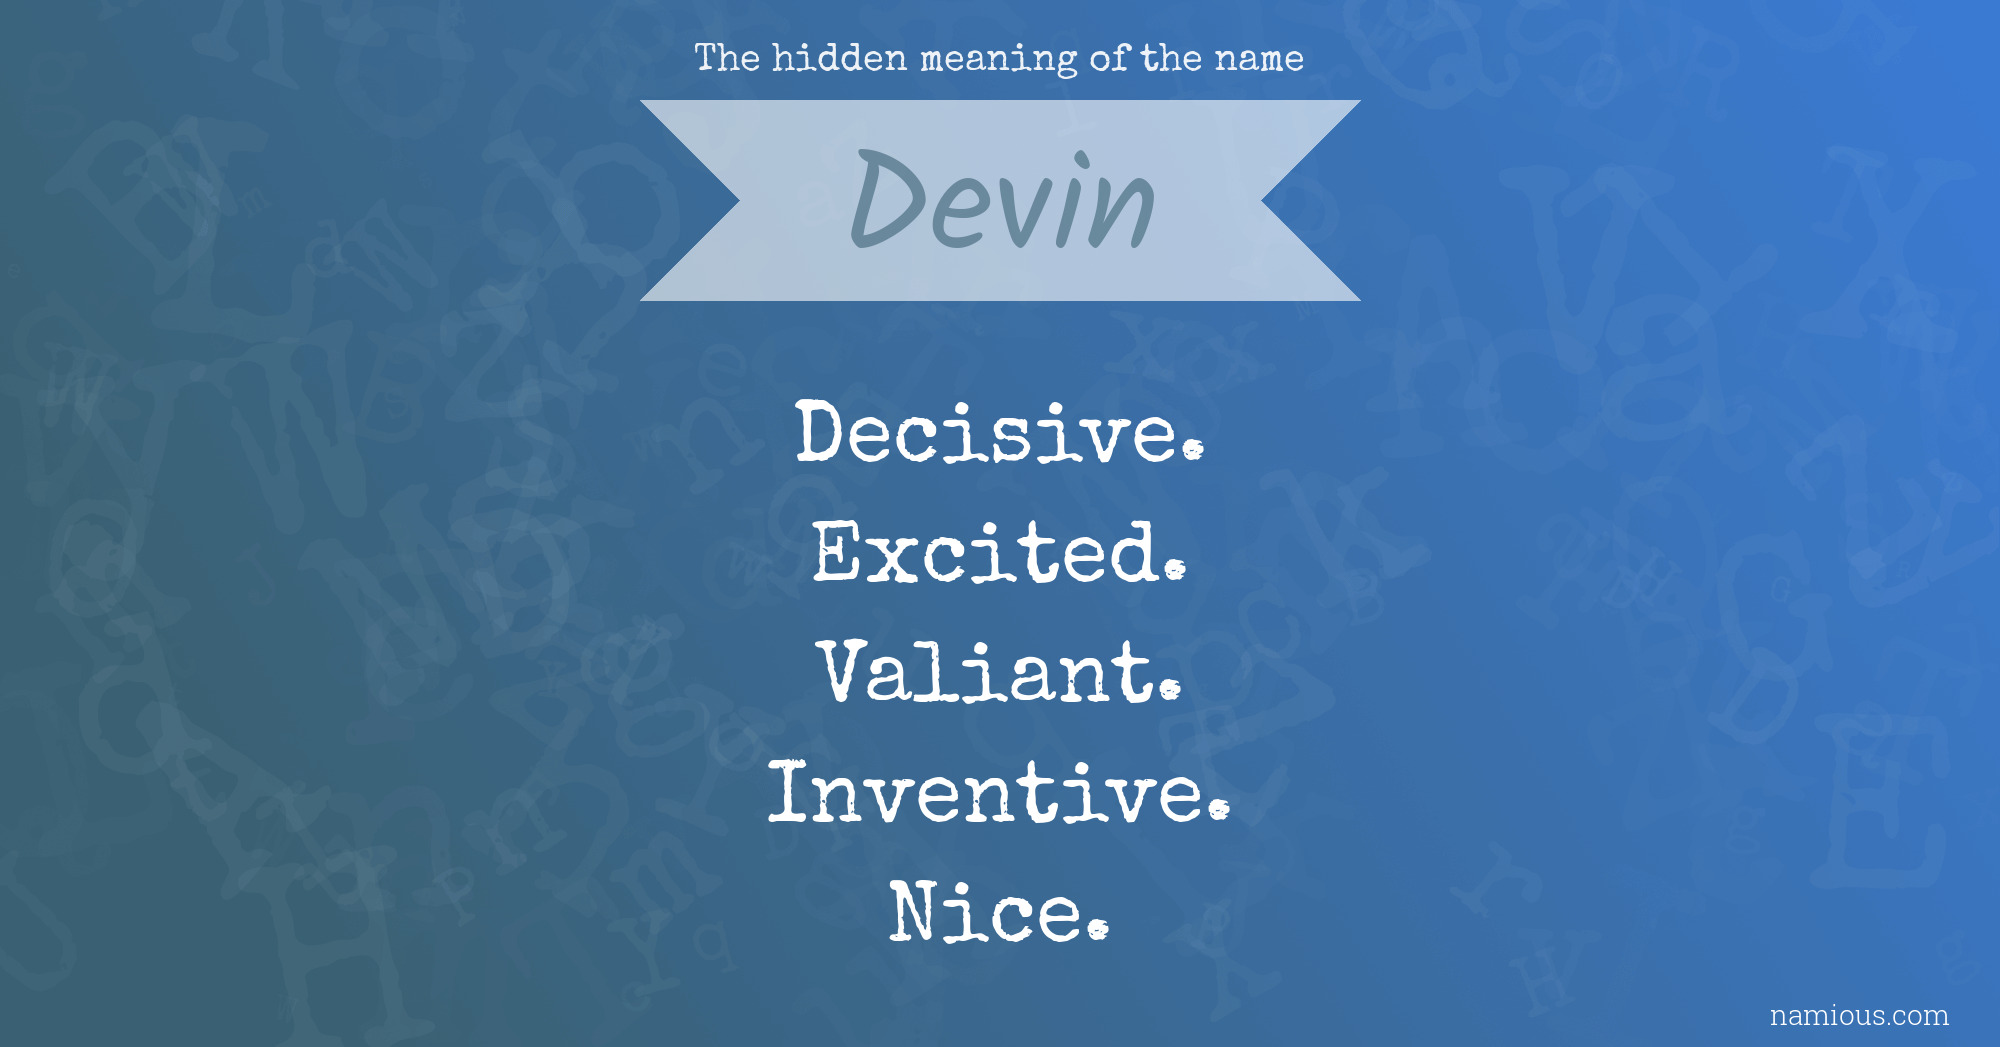 The hidden meaning of the name Devin